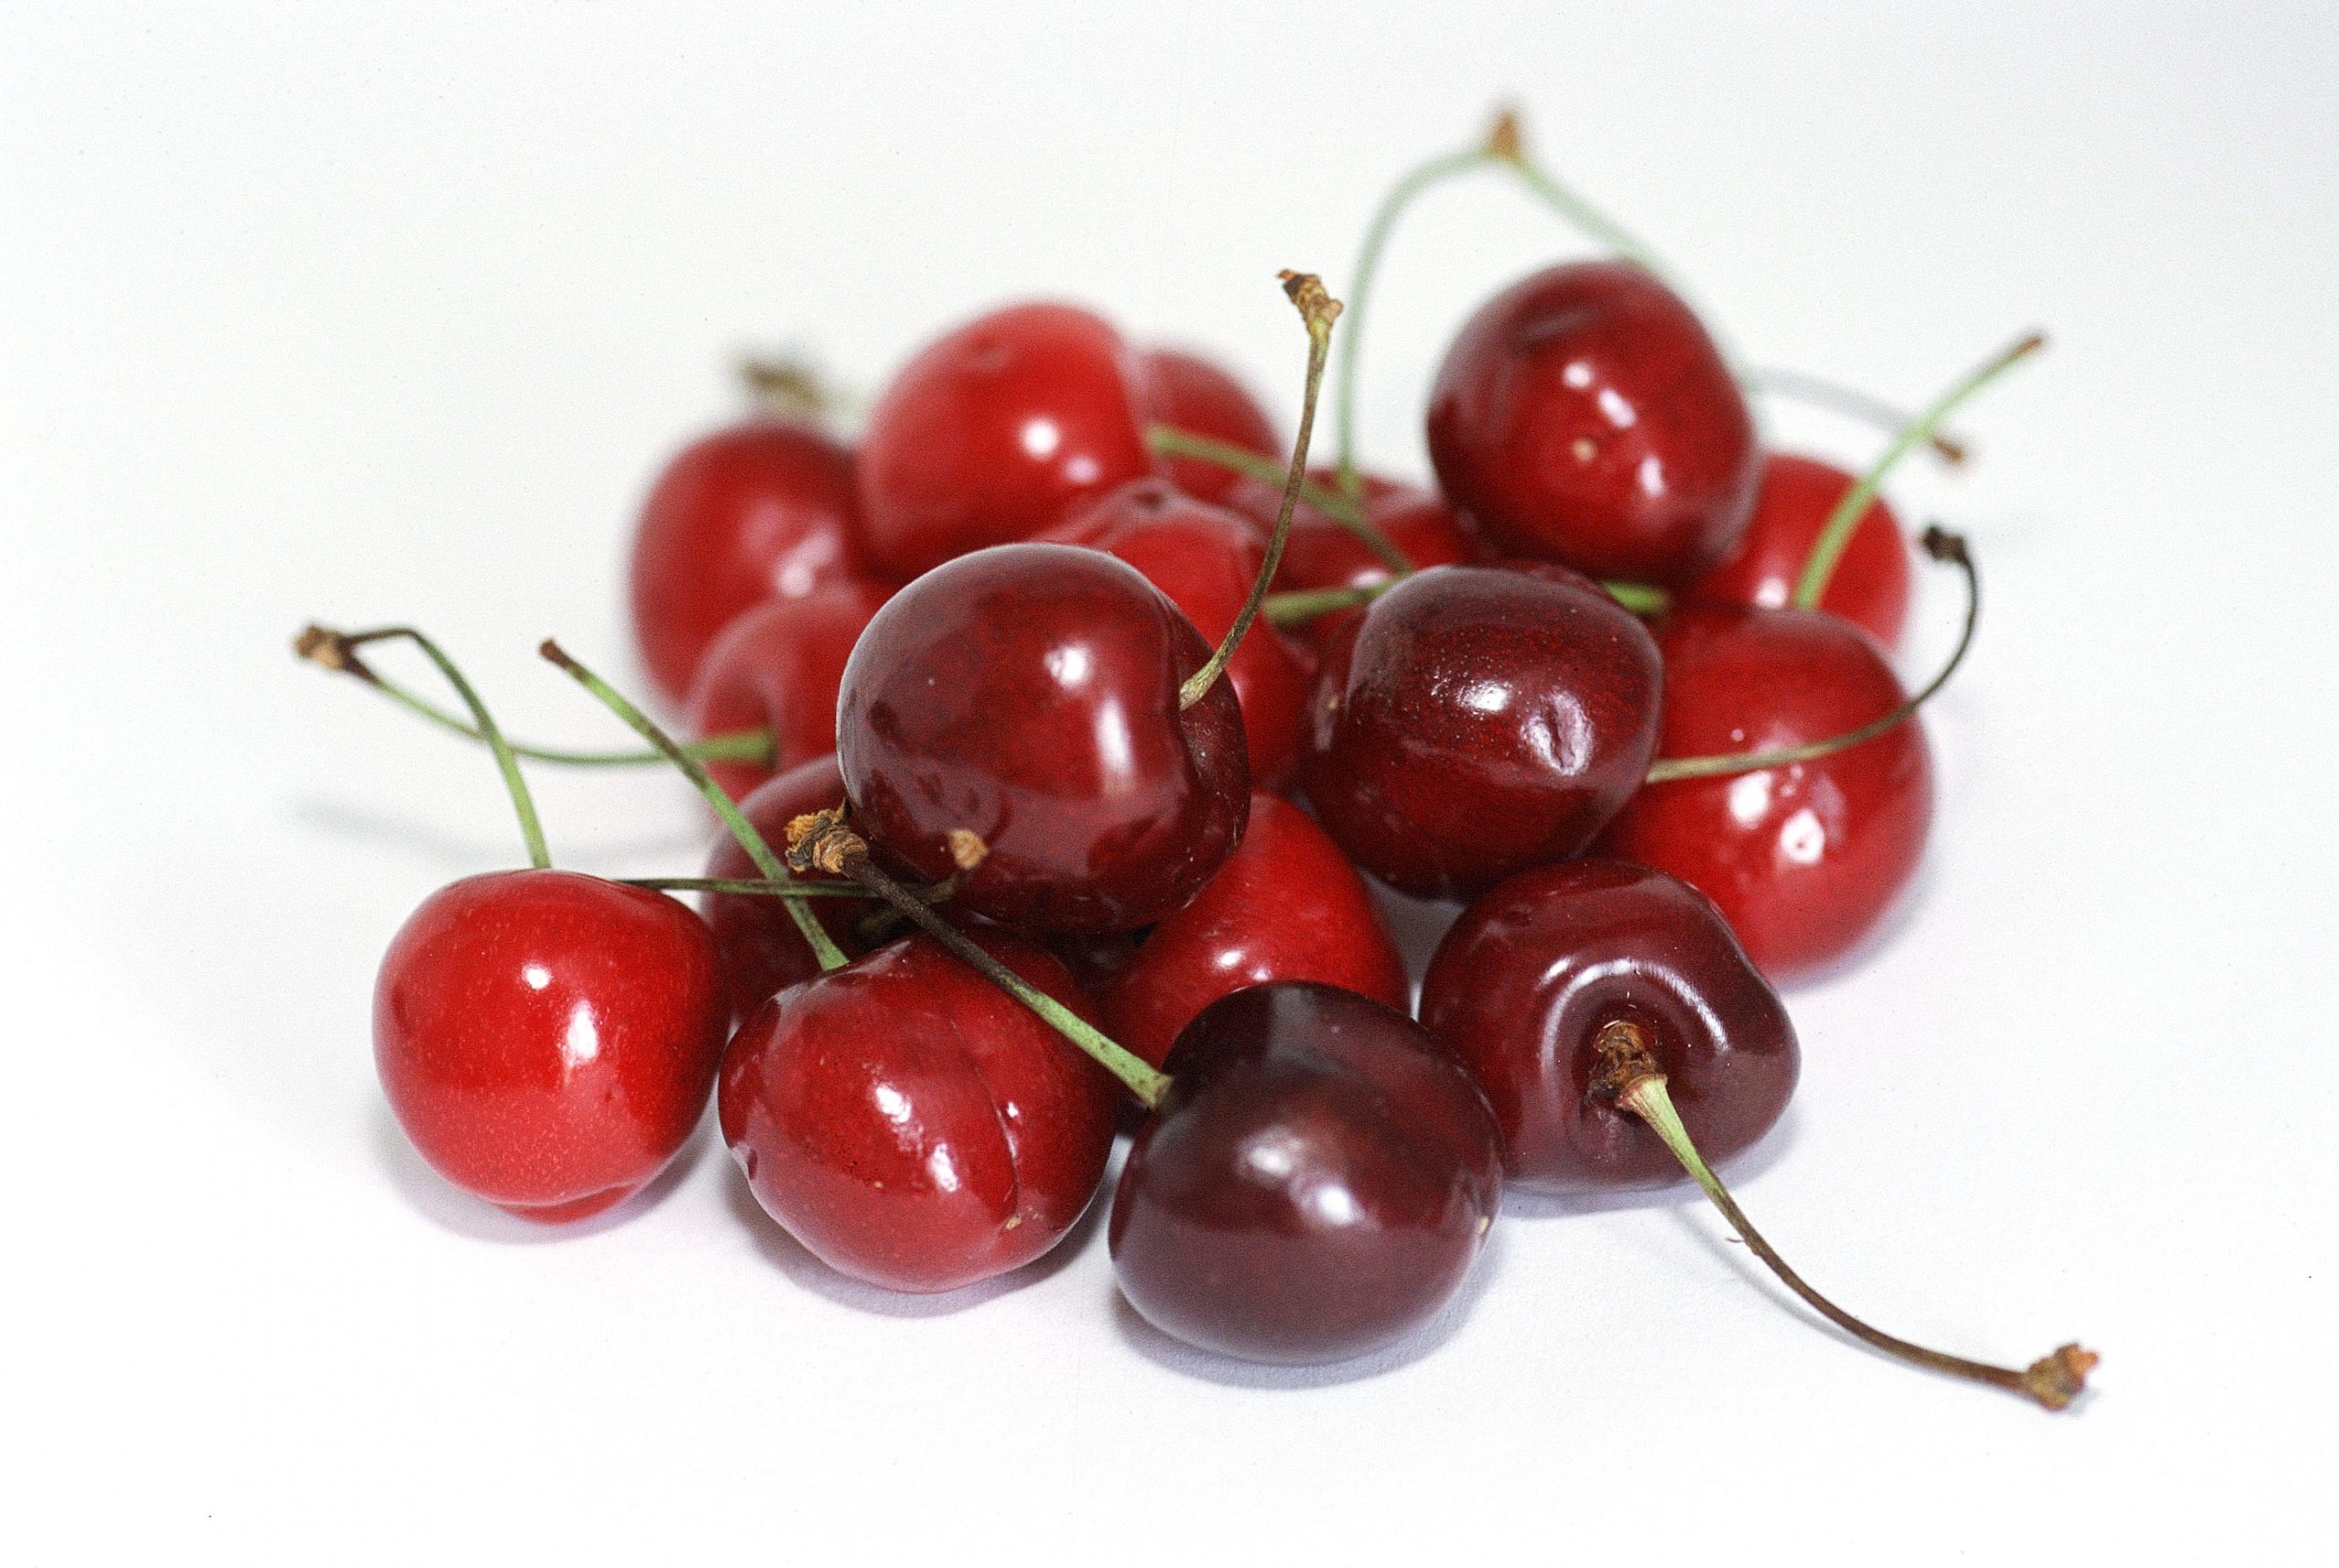 While US cherry exports to France will be prohibited this year, due to the Dimethoate ban, on the positive side for US cherry exporters is that France’s production is likely to be impacted by the ban on the pesticide – the French cherry crop is likely to be smaller and pricier – thus creating opportunities for France’s competitors in the EU, such as the UK.